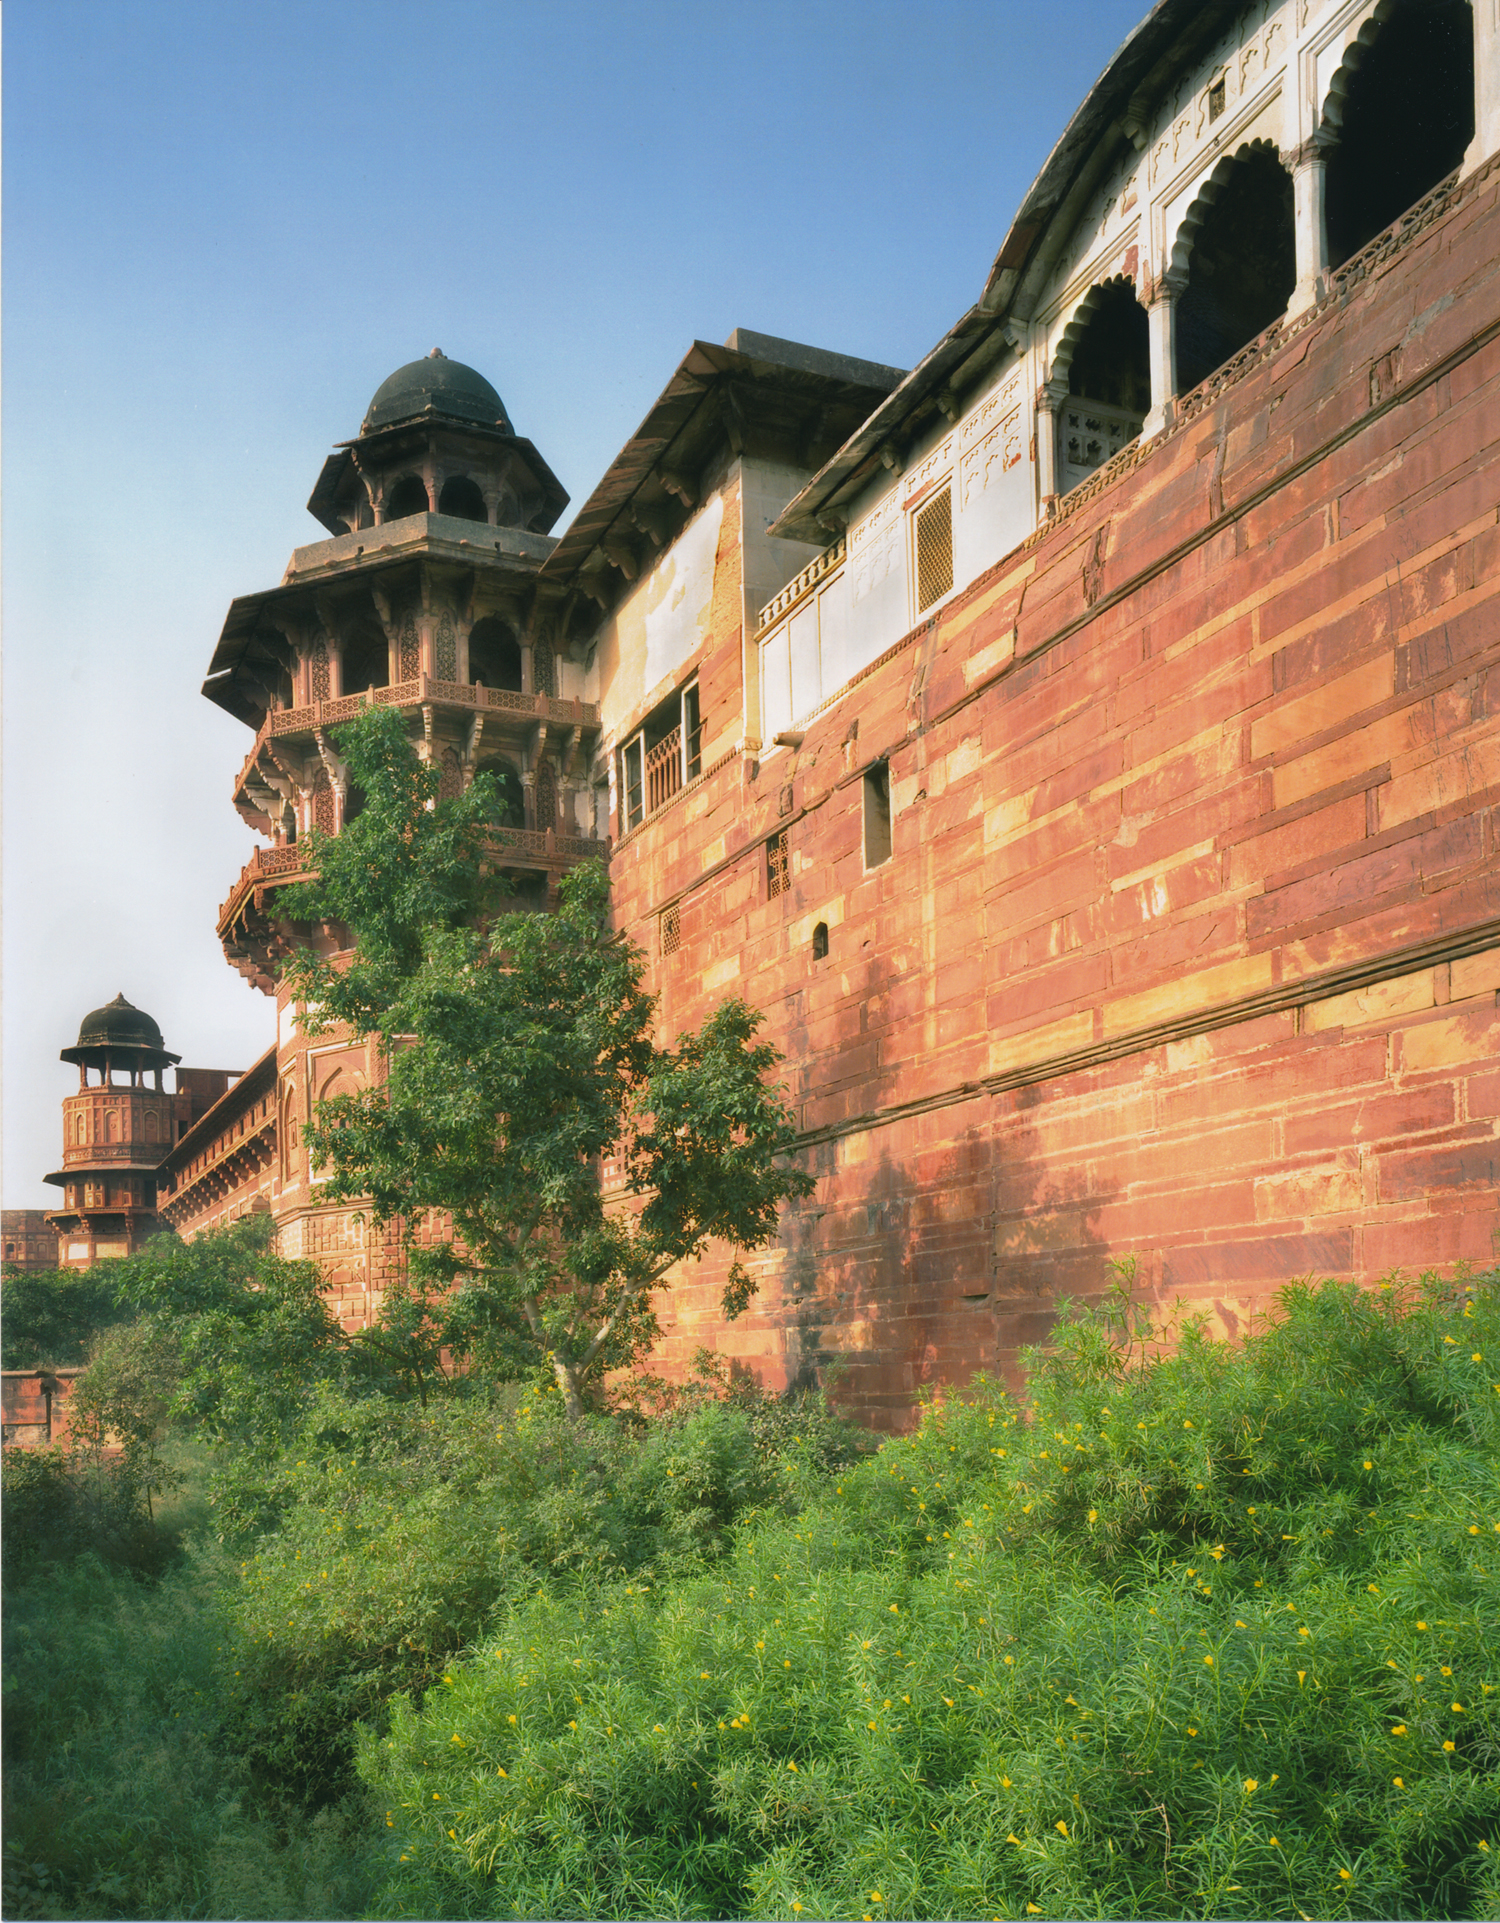 Exterior view of the fort complex